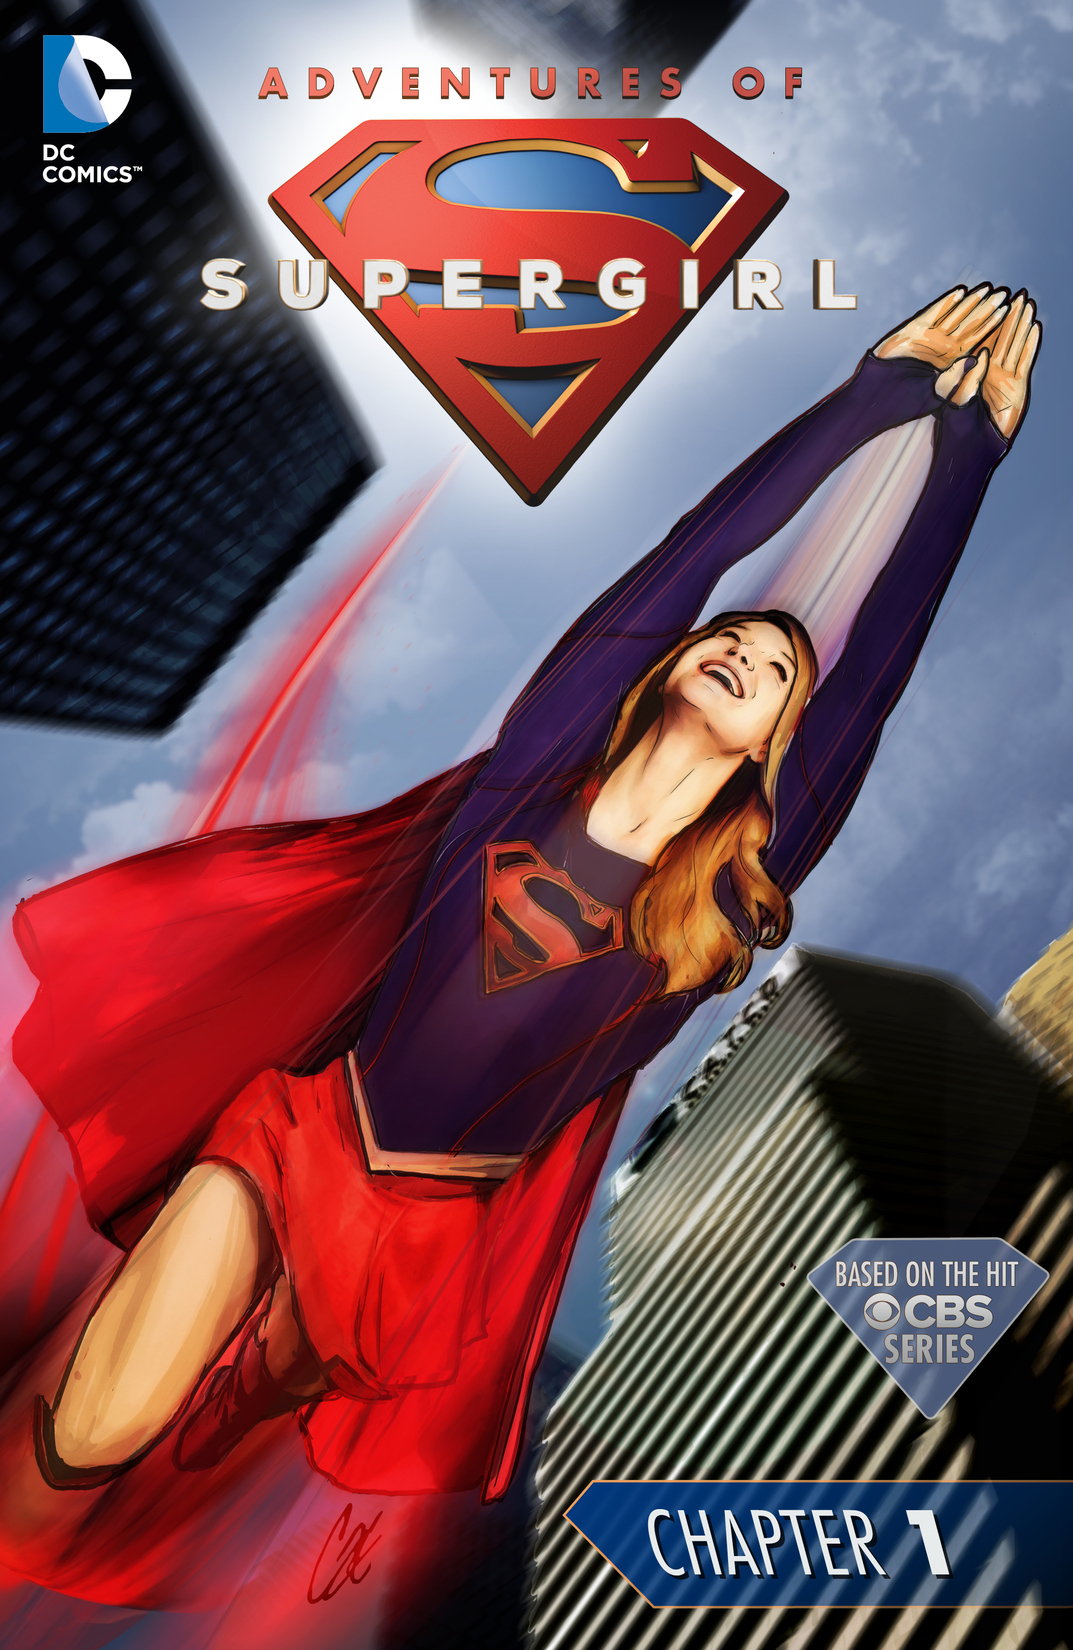 The Adventures of Supergirl #1 preview images